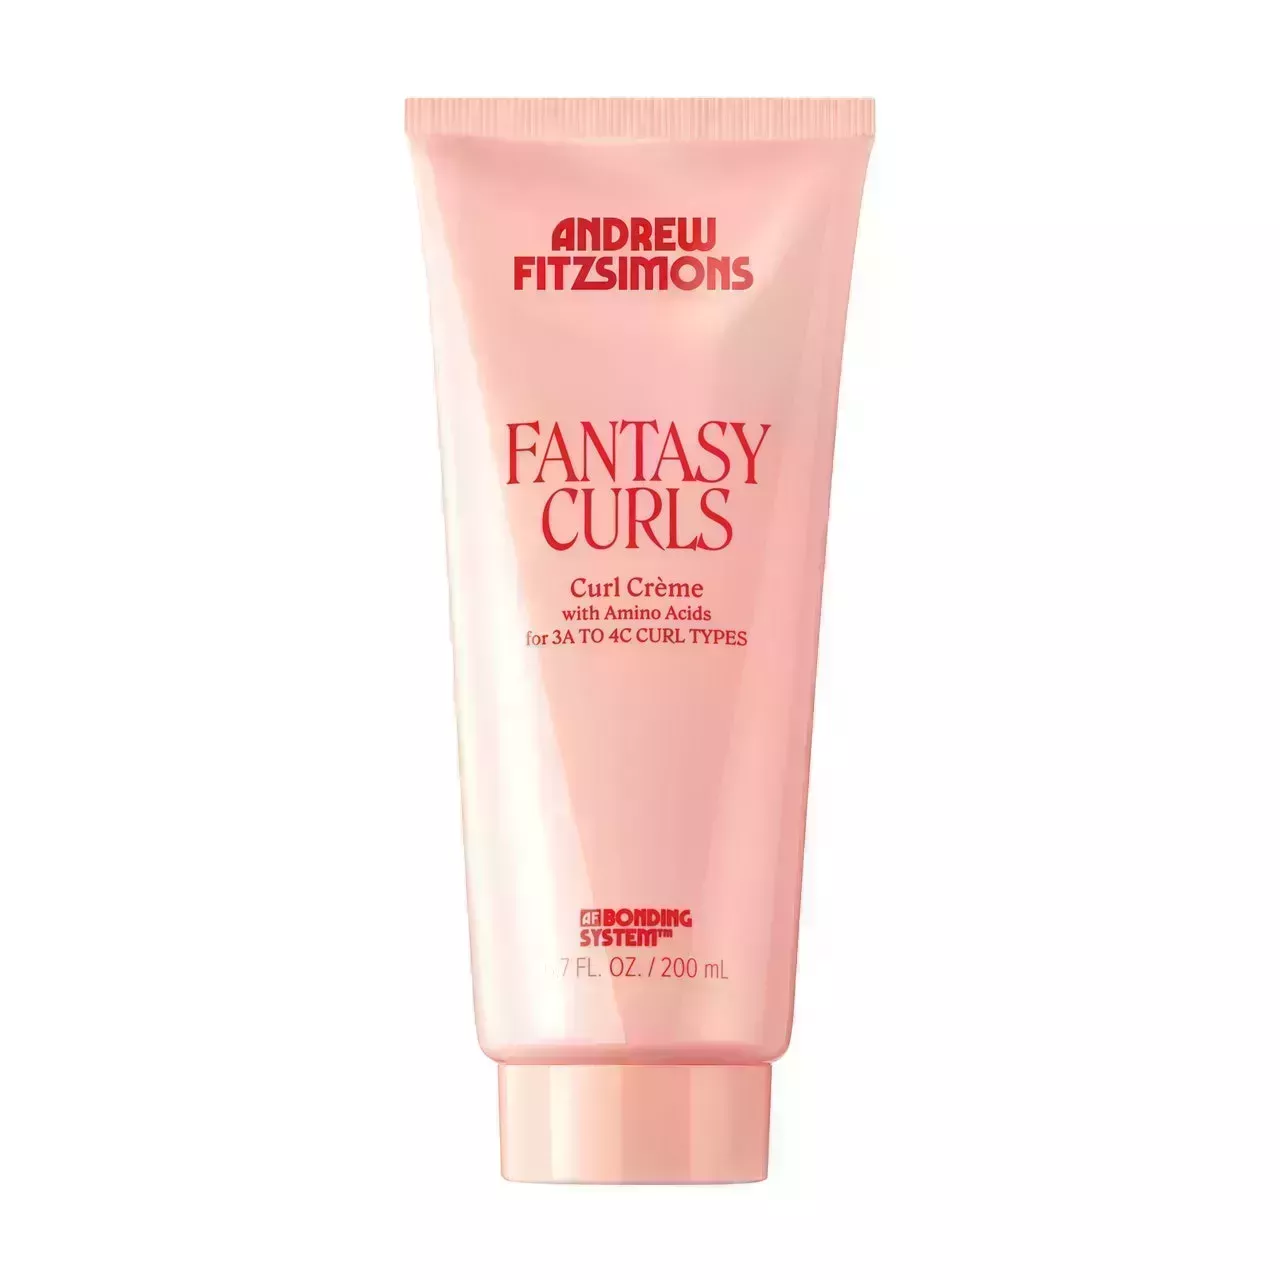 pink squeeze bottle of Andrew Fitzsimons Fantasy Curls Curl Creme on a white background